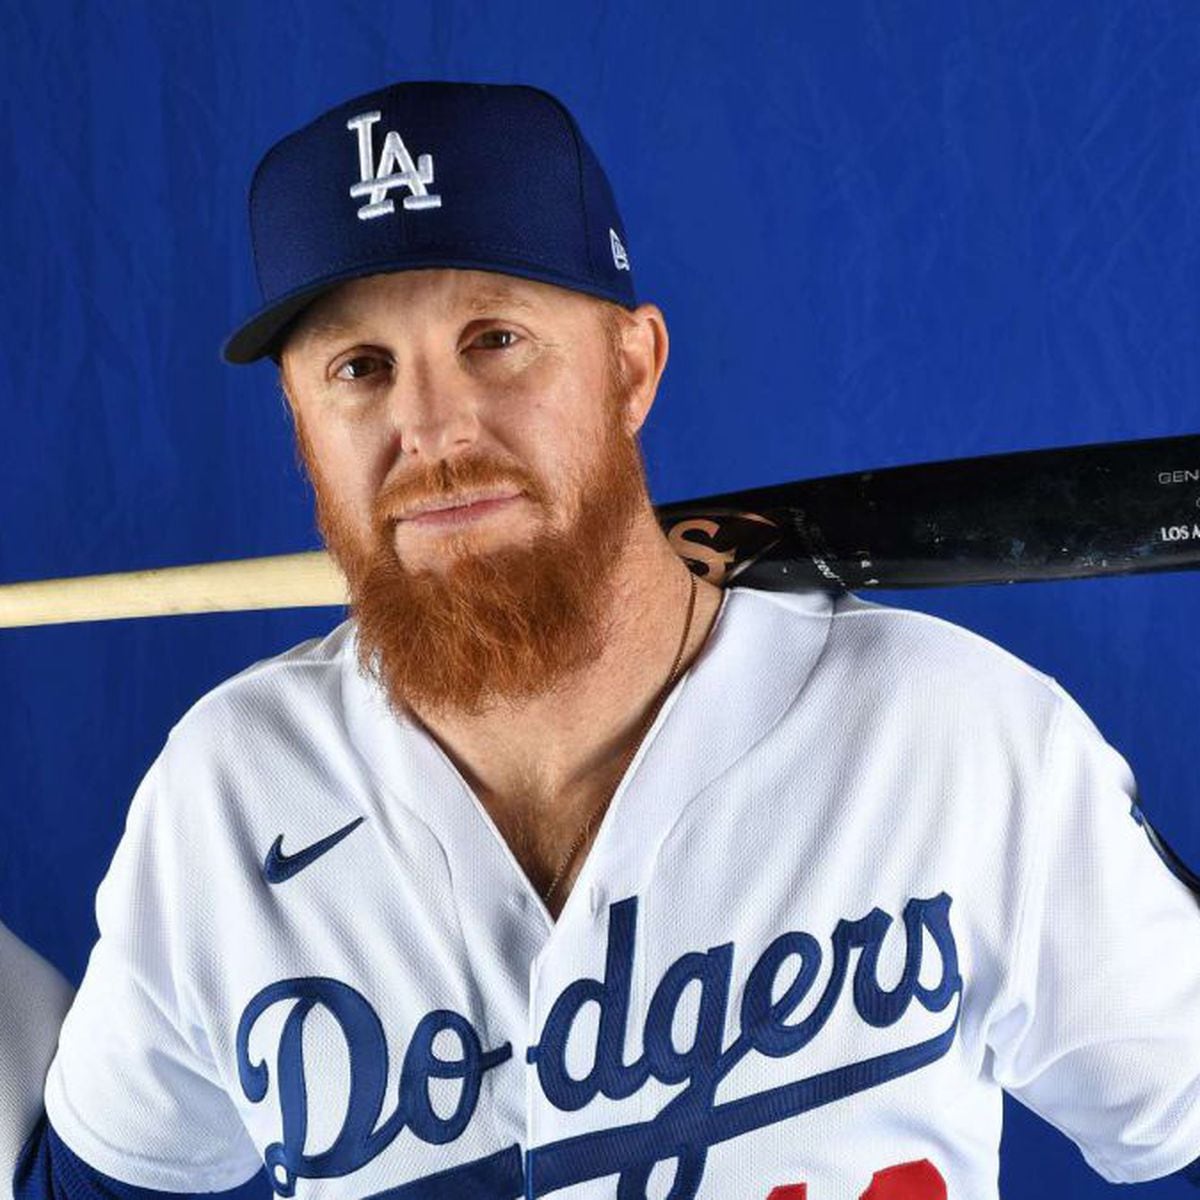 MLB - From Dodger blue to Red Sox! Justin Turner has